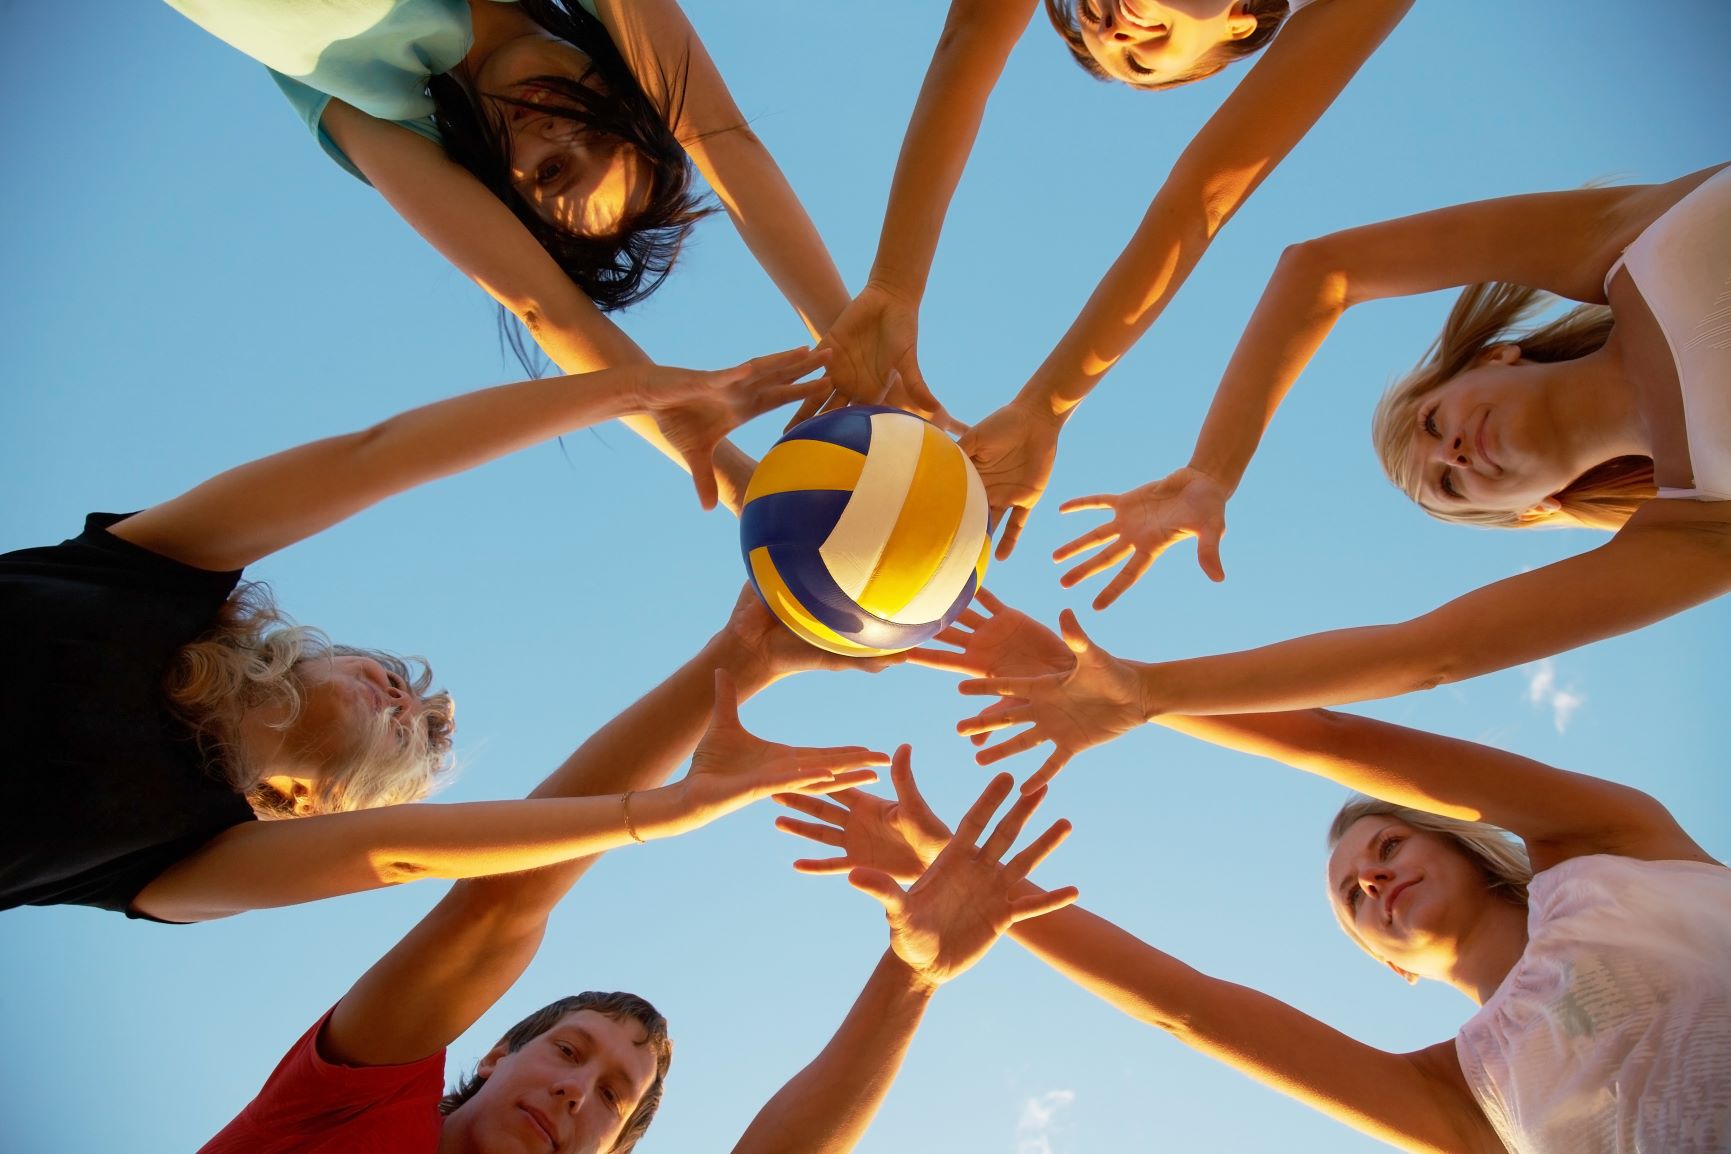 group volley ball image 